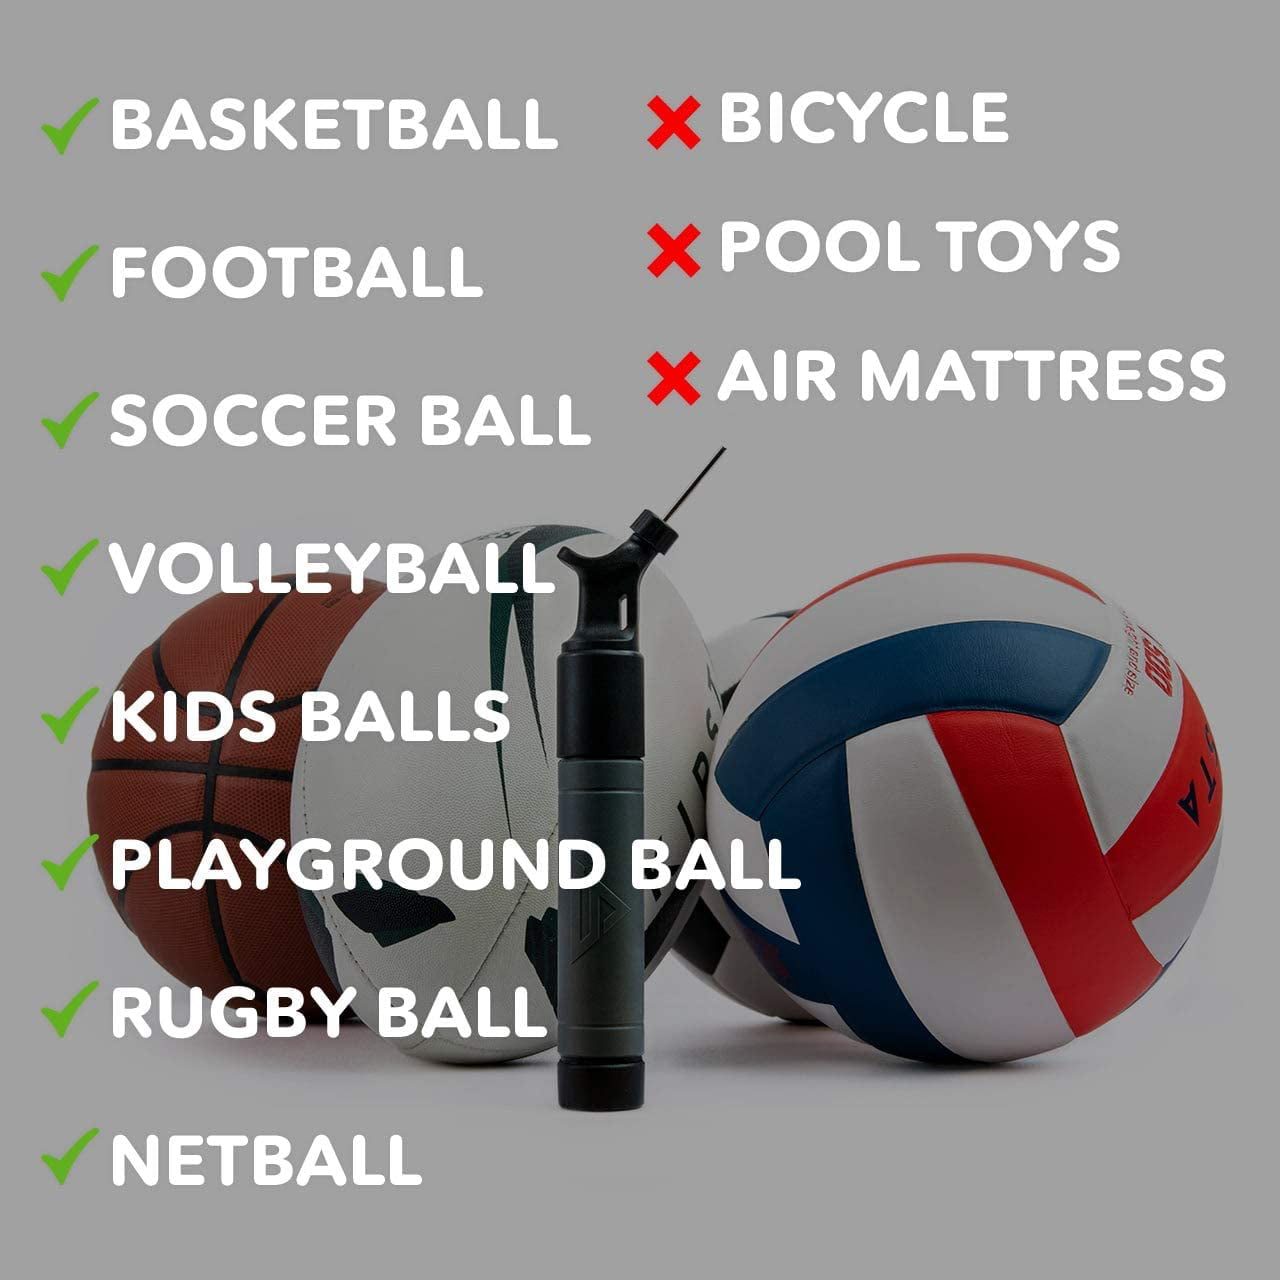 and Other Inflatable Balls Volleyball Football Sports Stable Ball Pump with 2 Spare Needles Dual-Action Air Pump for Your Basketball Soccer Ball